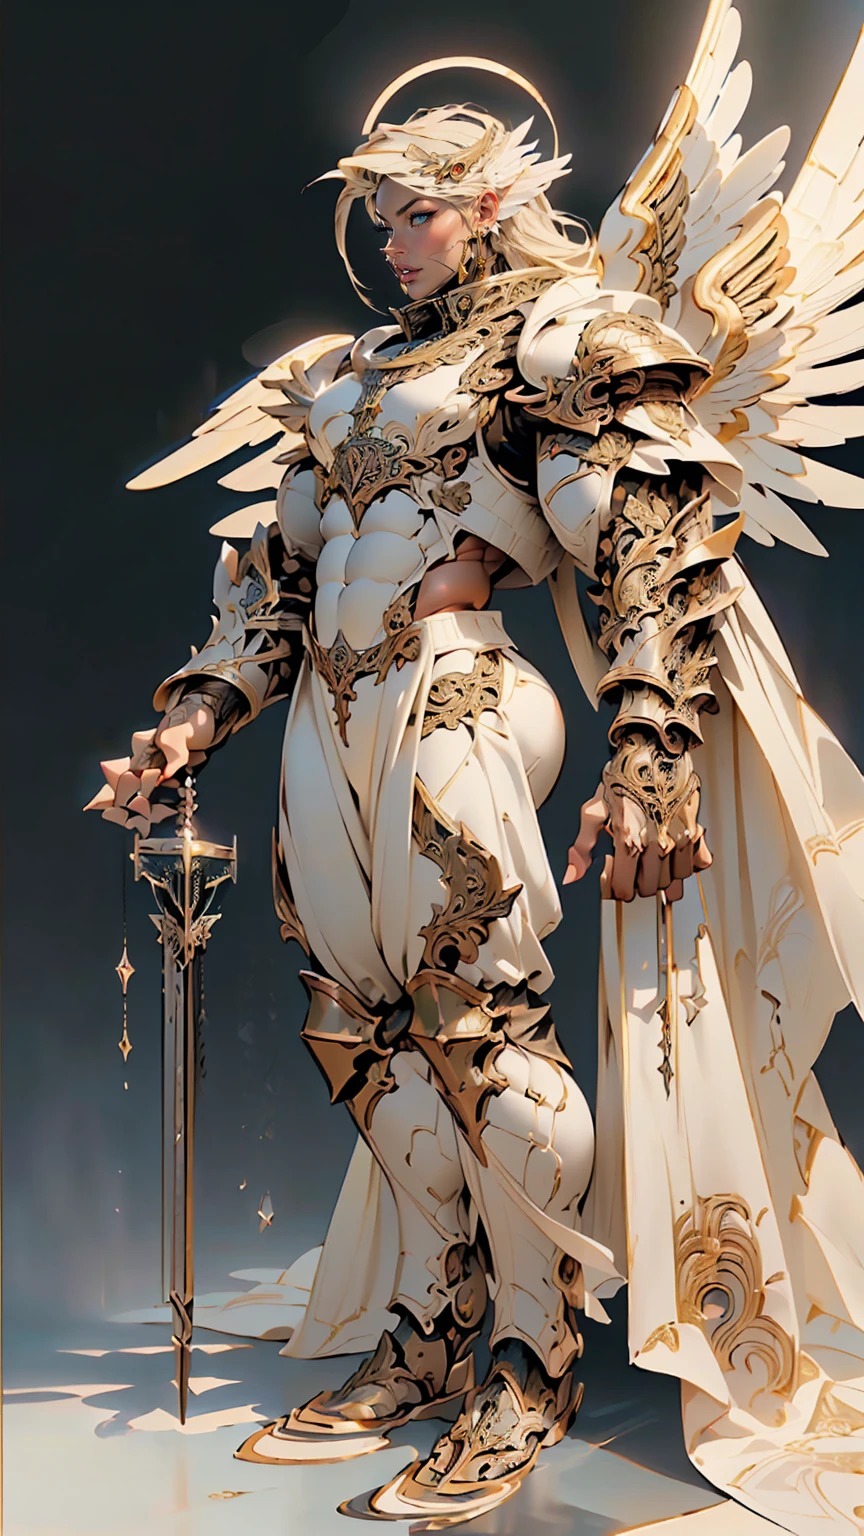 (cara delevingne), ((((((1 muscular angel girl)))))), (((huge upper body))), long hair, ((((huge angelic wings))), (((intricate ornate angelic full body armor))), ((((full body front view)))), (((perfect hands, perfect fingers))), (((tarot style background)))